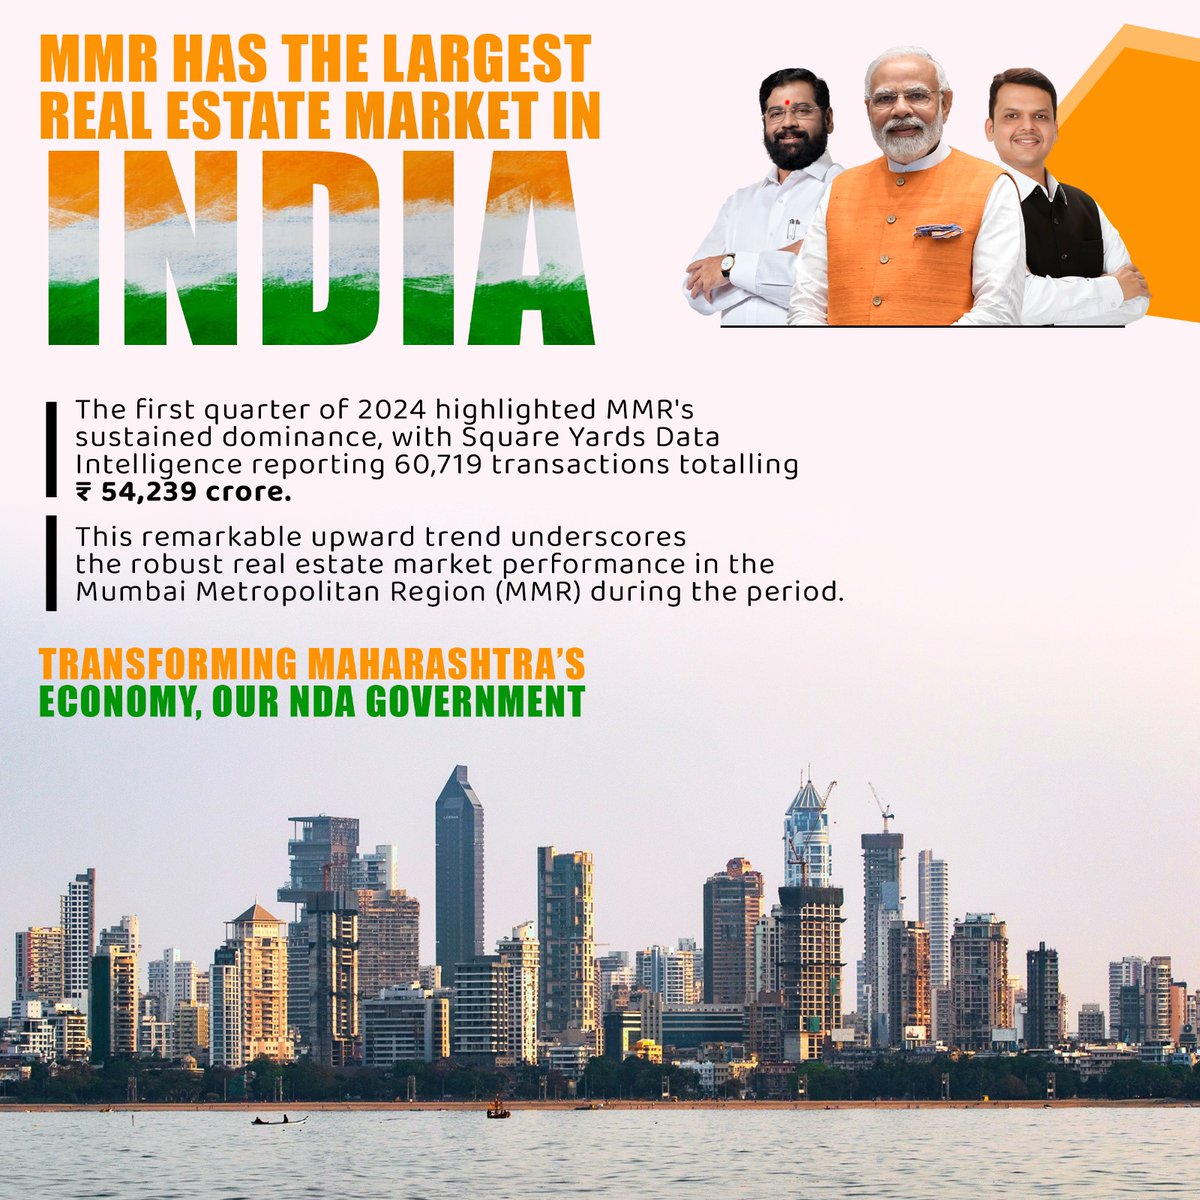 MMR's real estate market remains unrivaled, recording over 60,000 transactions worth 54,239 crore in the first quarter of 2024. Kudos to CM Eknath Shinde Govt for creating an environment conducive to such remarkable growth and investment!